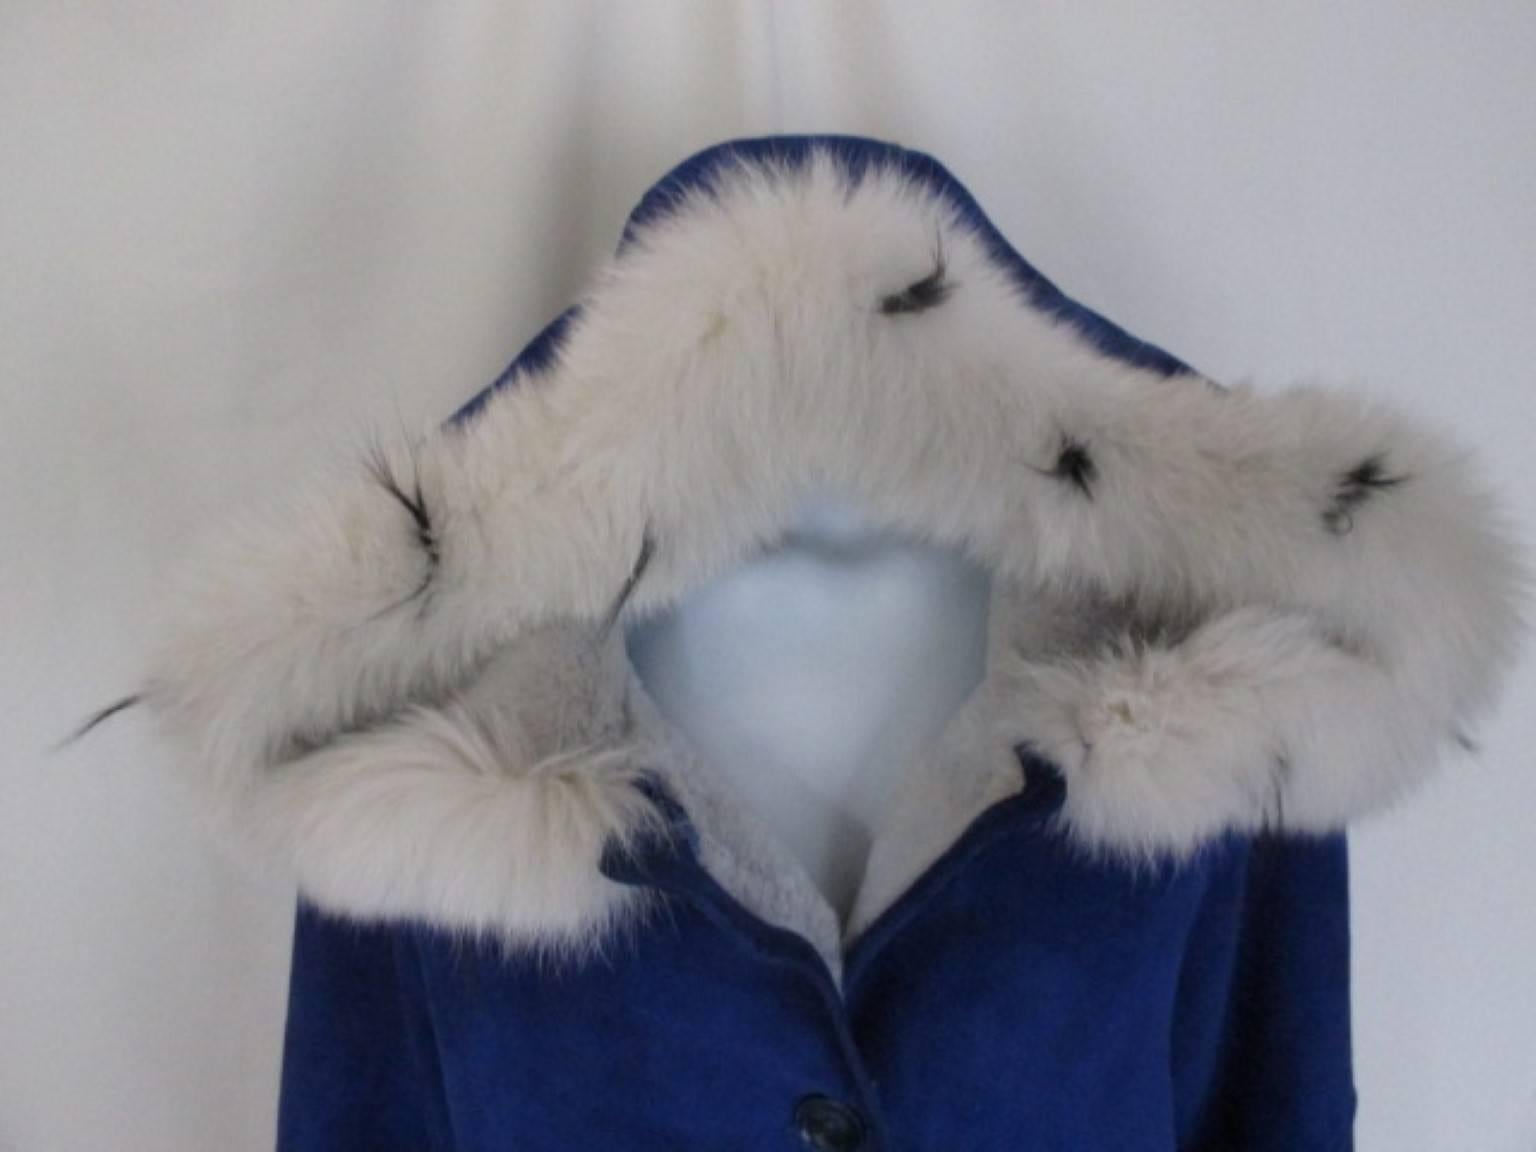 This coat is made of very soft suede shearling

We offer more exclusive fur and lamb fur coats, view our frontstore

It has white fox fur details at the end of the sleeves and at the hood.
Its in pre-loved vintage condition and has some wear at the